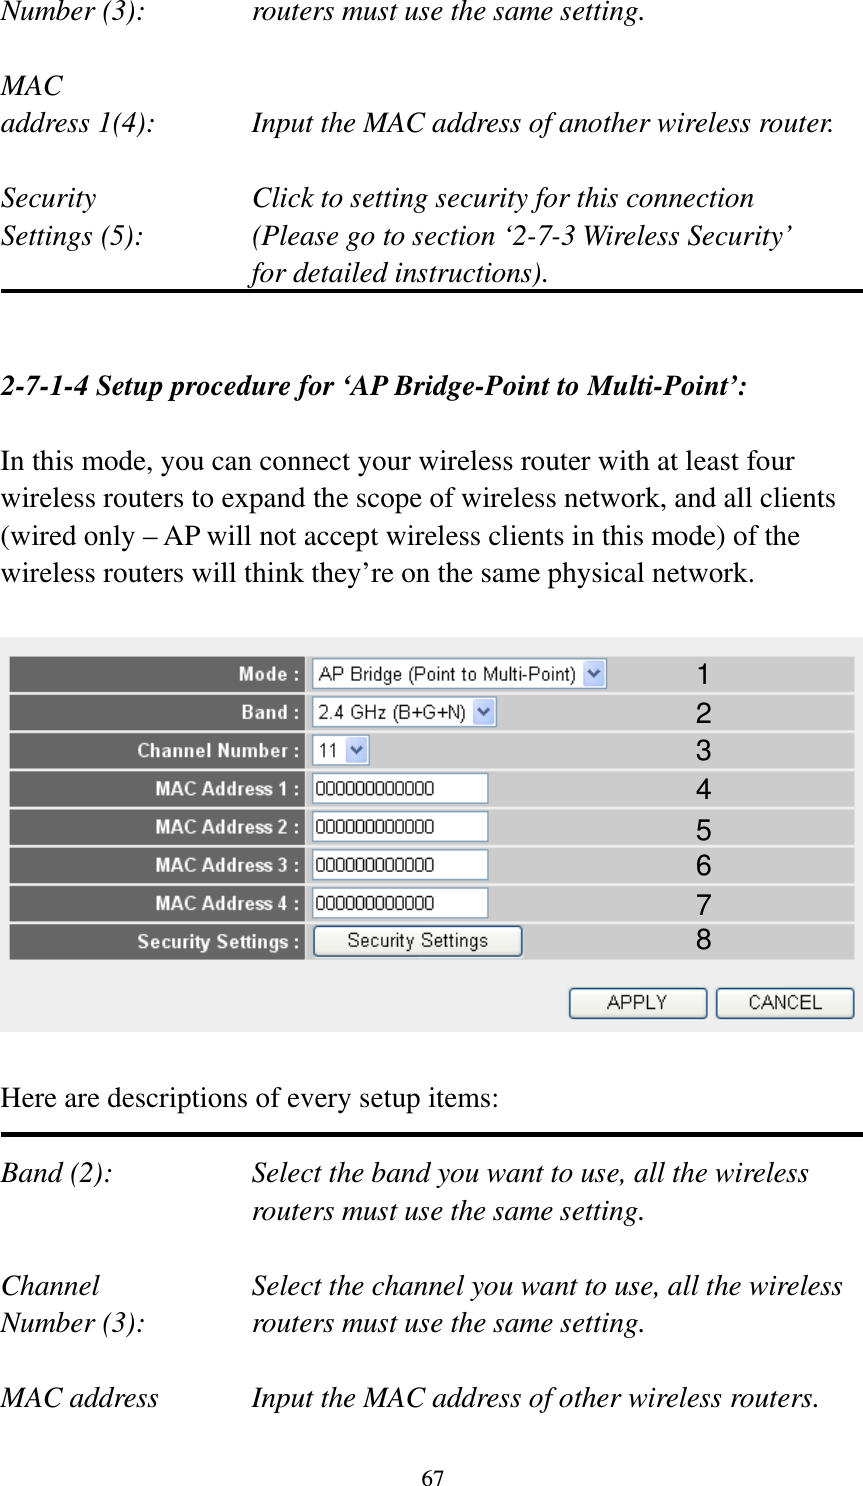 67 Number (3):  routers must use the same setting.  MAC address 1(4):  Input the MAC address of another wireless router.  Security    Click to setting security for this connection Settings (5):  (Please go to section ‘2-7-3 Wireless Security’   for detailed instructions).   2-7-1-4 Setup procedure for ‘AP Bridge-Point to Multi-Point’:  In this mode, you can connect your wireless router with at least four wireless routers to expand the scope of wireless network, and all clients (wired only – AP will not accept wireless clients in this mode) of the wireless routers will think they’re on the same physical network.    Here are descriptions of every setup items:  Band (2):  Select the band you want to use, all the wireless routers must use the same setting.  Channel  Select the channel you want to use, all the wireless Number (3):  routers must use the same setting.  MAC address    Input the MAC address of other wireless routers. 1 2 3 4 5 6 7 8 